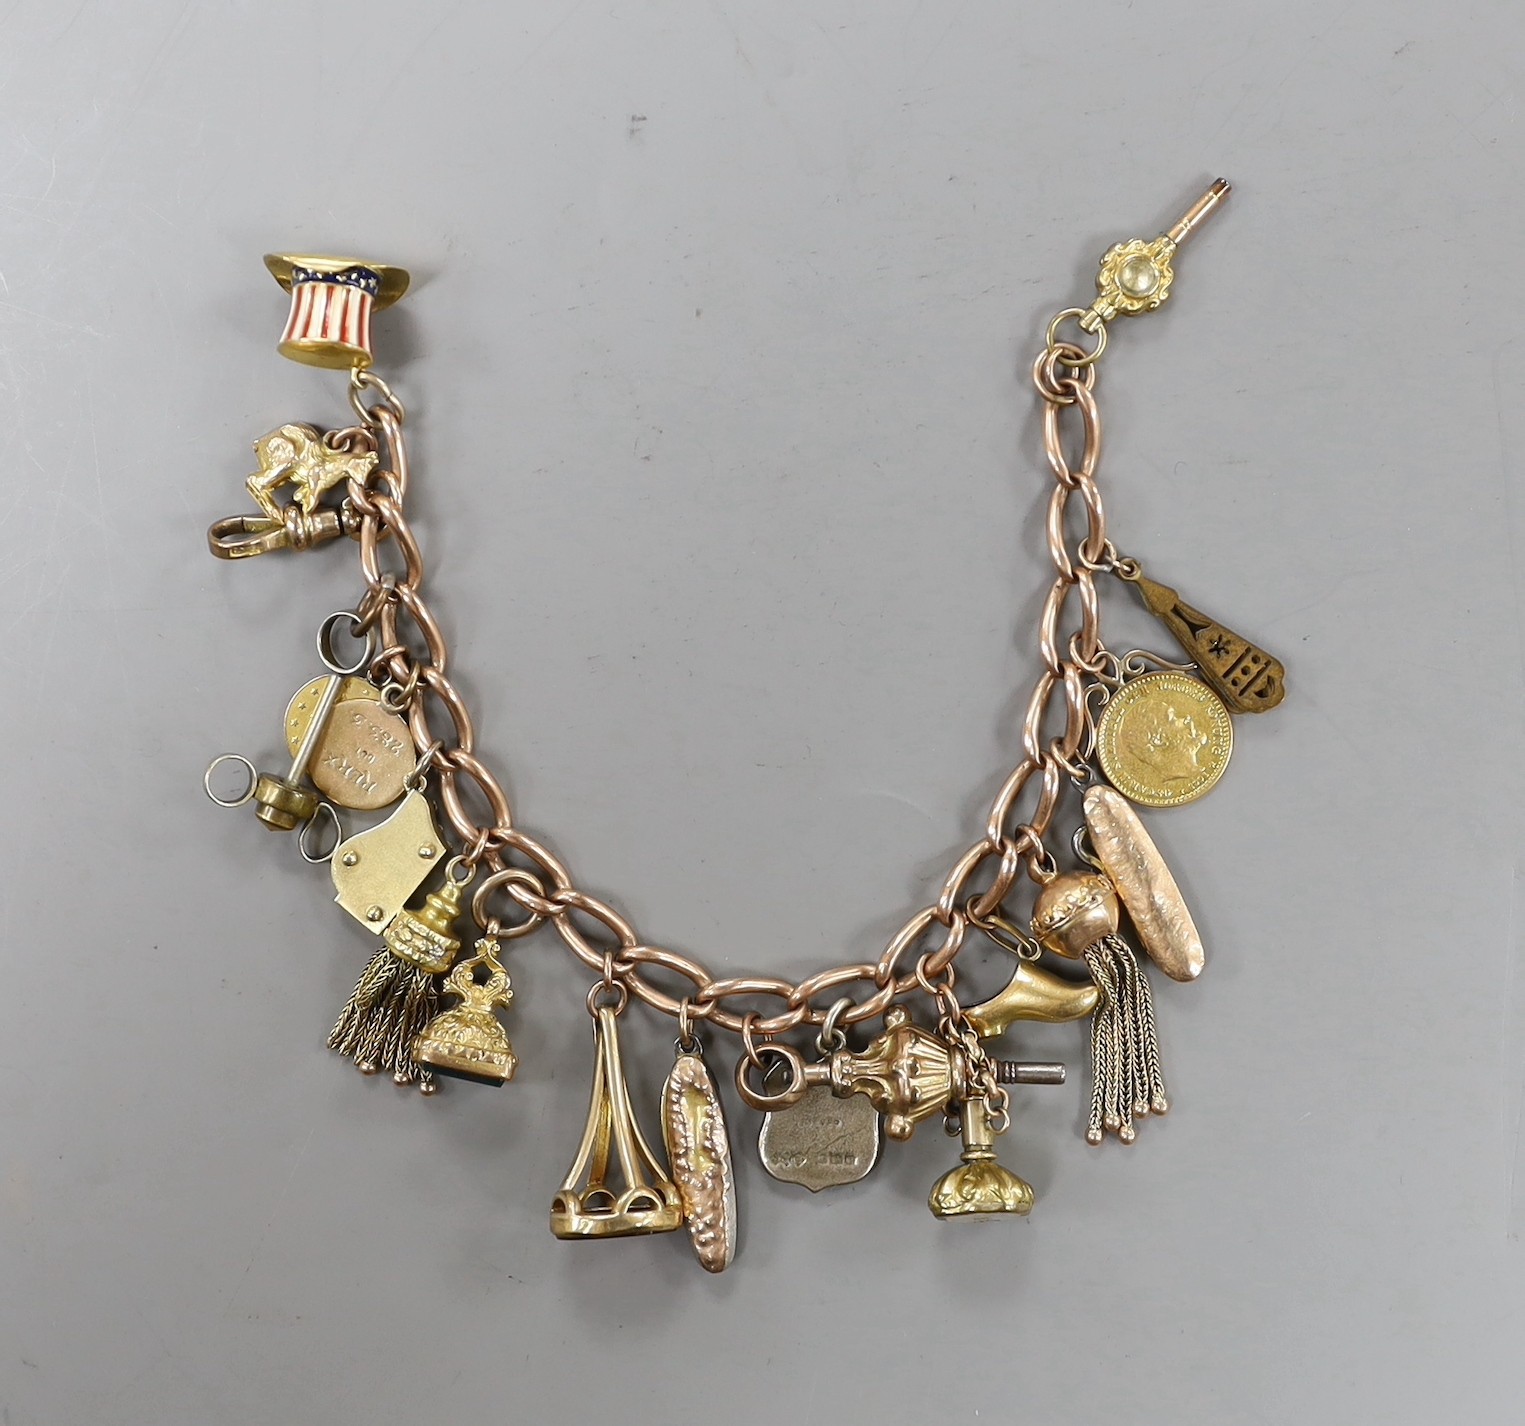 A 9ct charm bracelet, hung with assorted charms including two 9ct, silver and enamel, gilt metal and two gold coins gross weight 61.4 grams.                                                                                